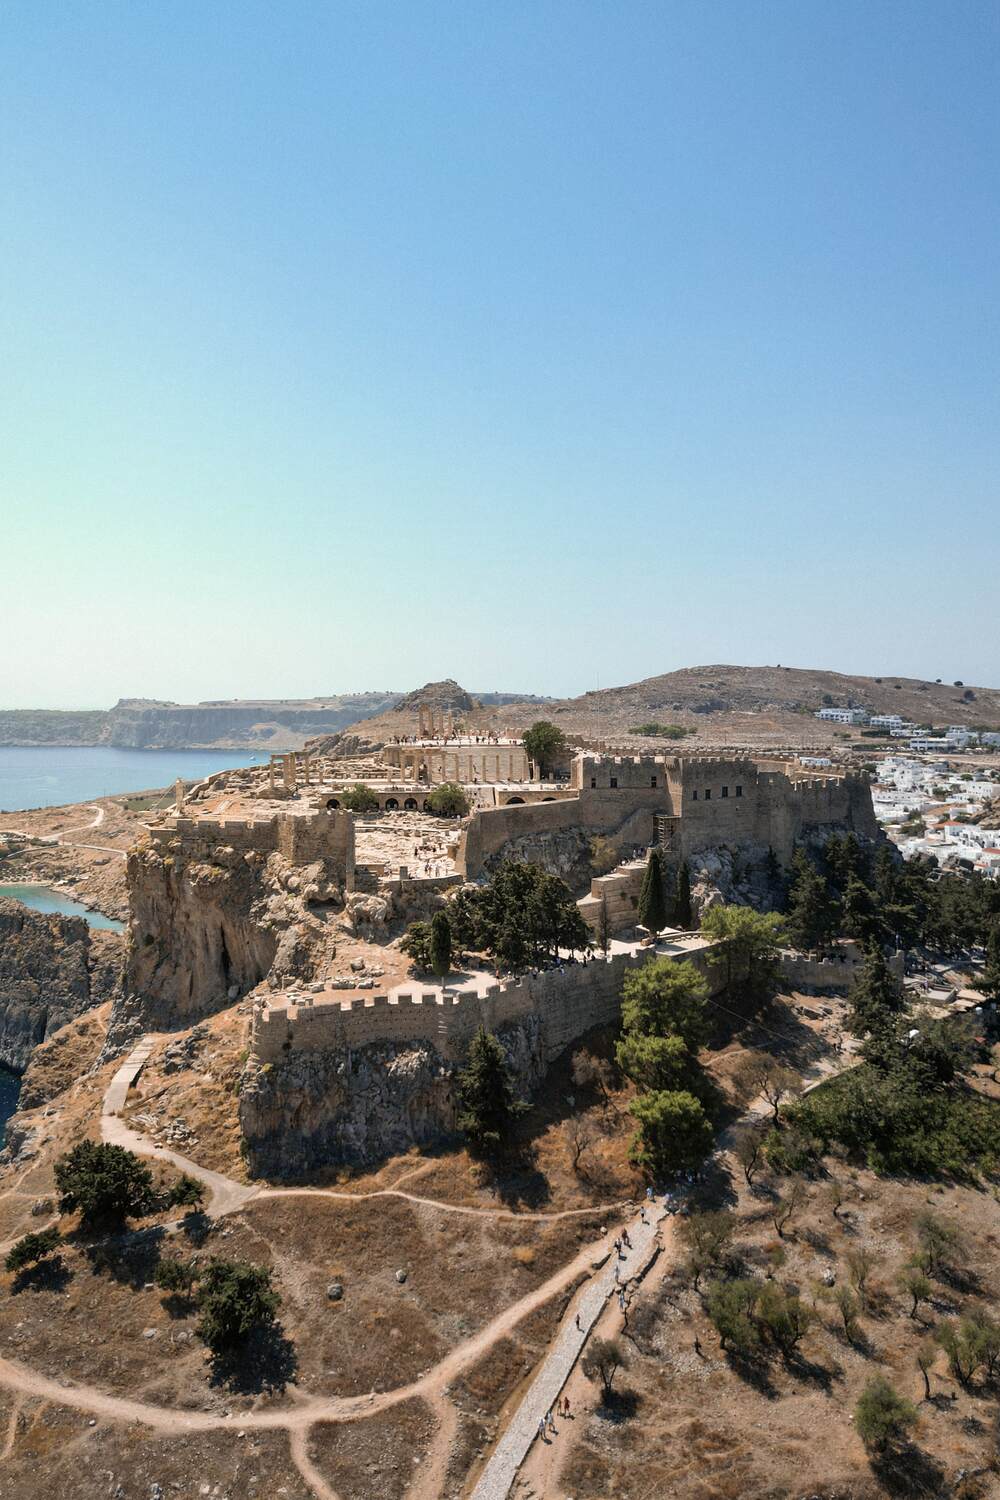 Drone View of Acropolis of Lindos